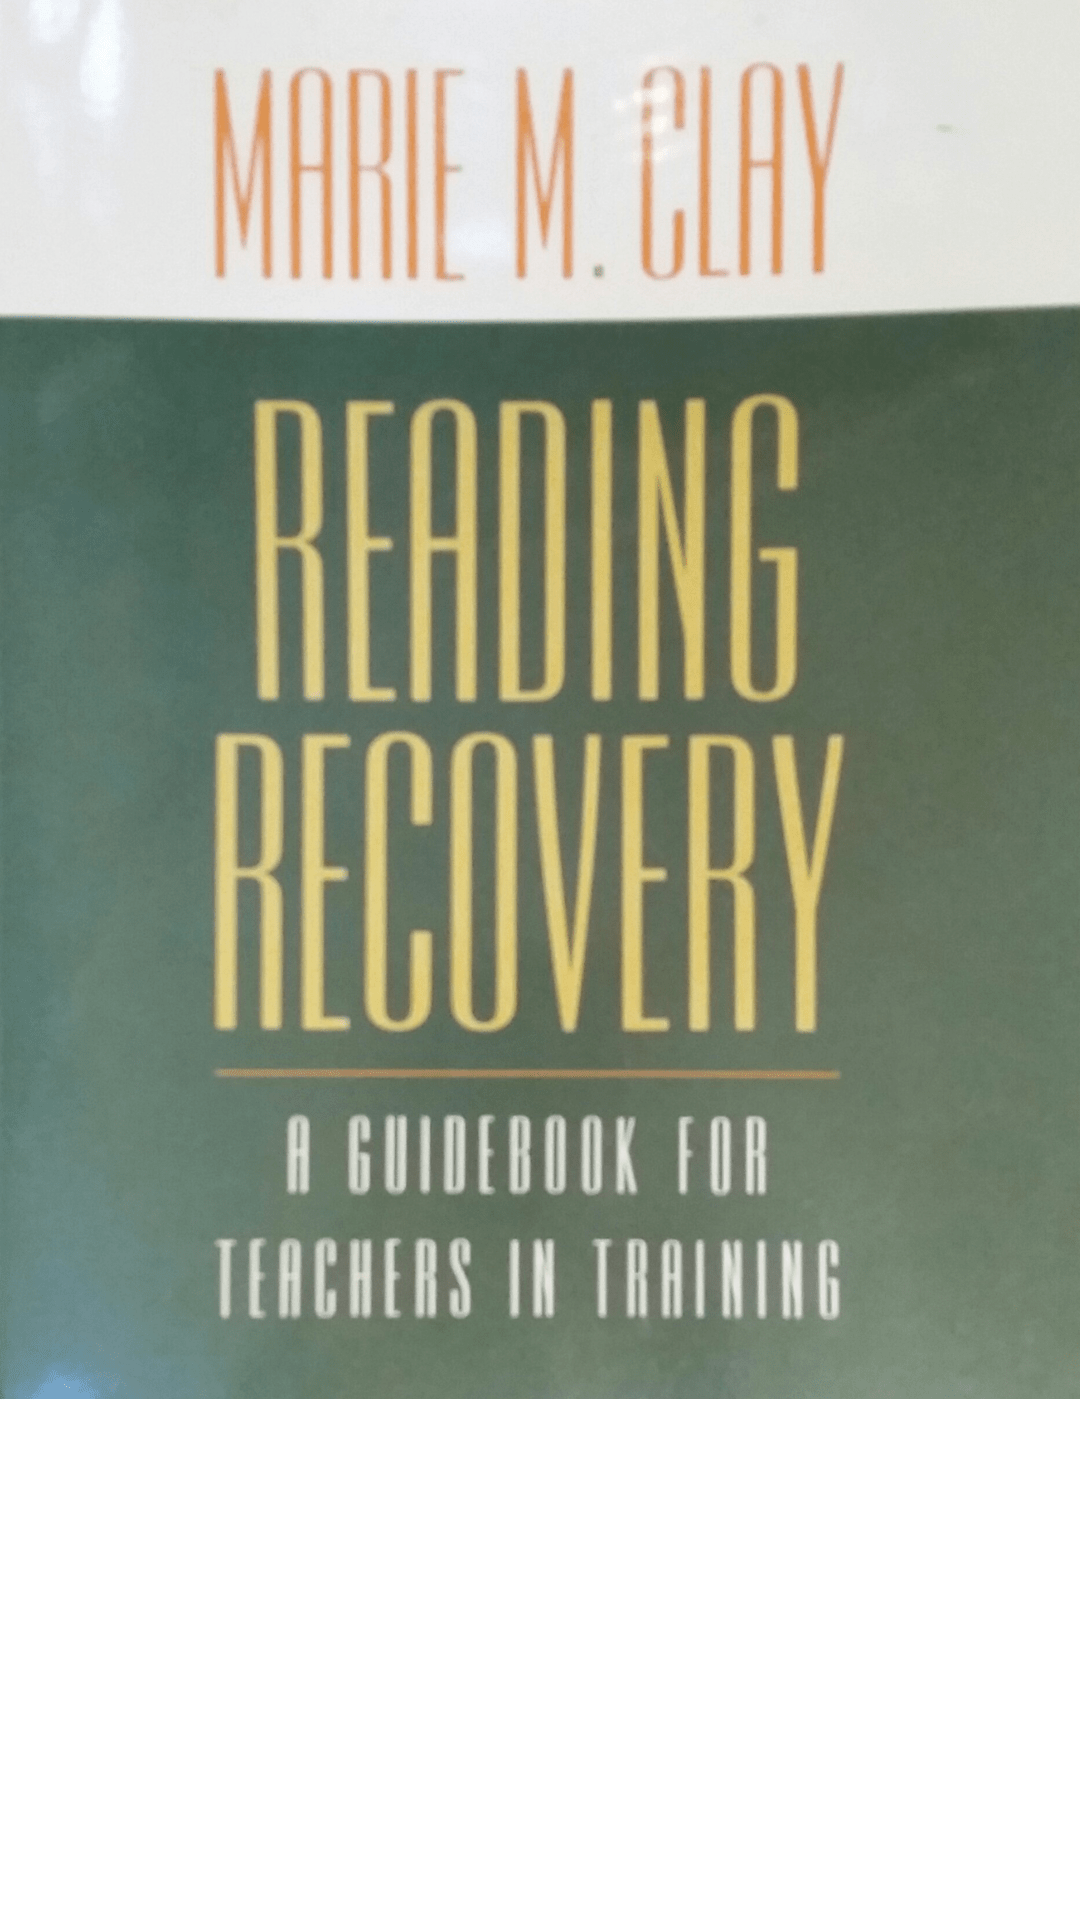 Reading Recovery by Marie M. Clay